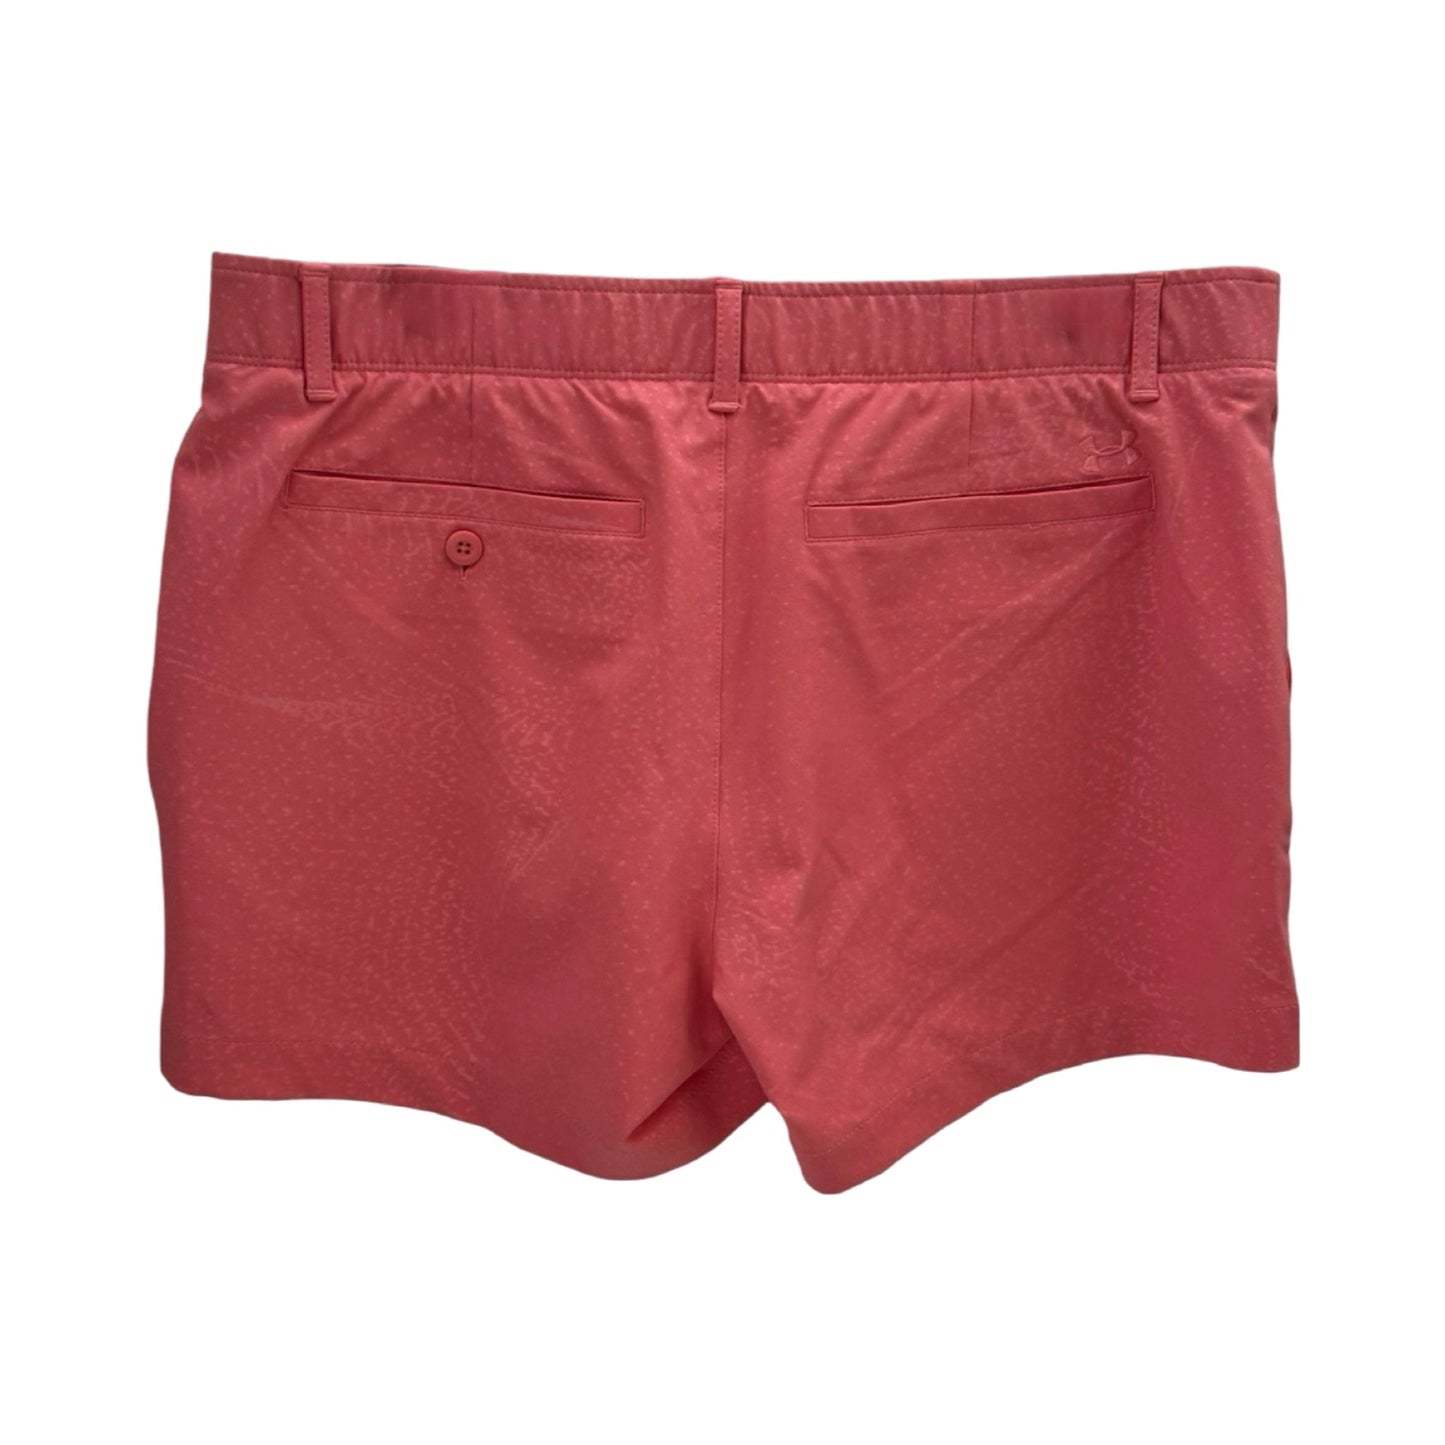 Pink Shorts Under Armour, Size 14